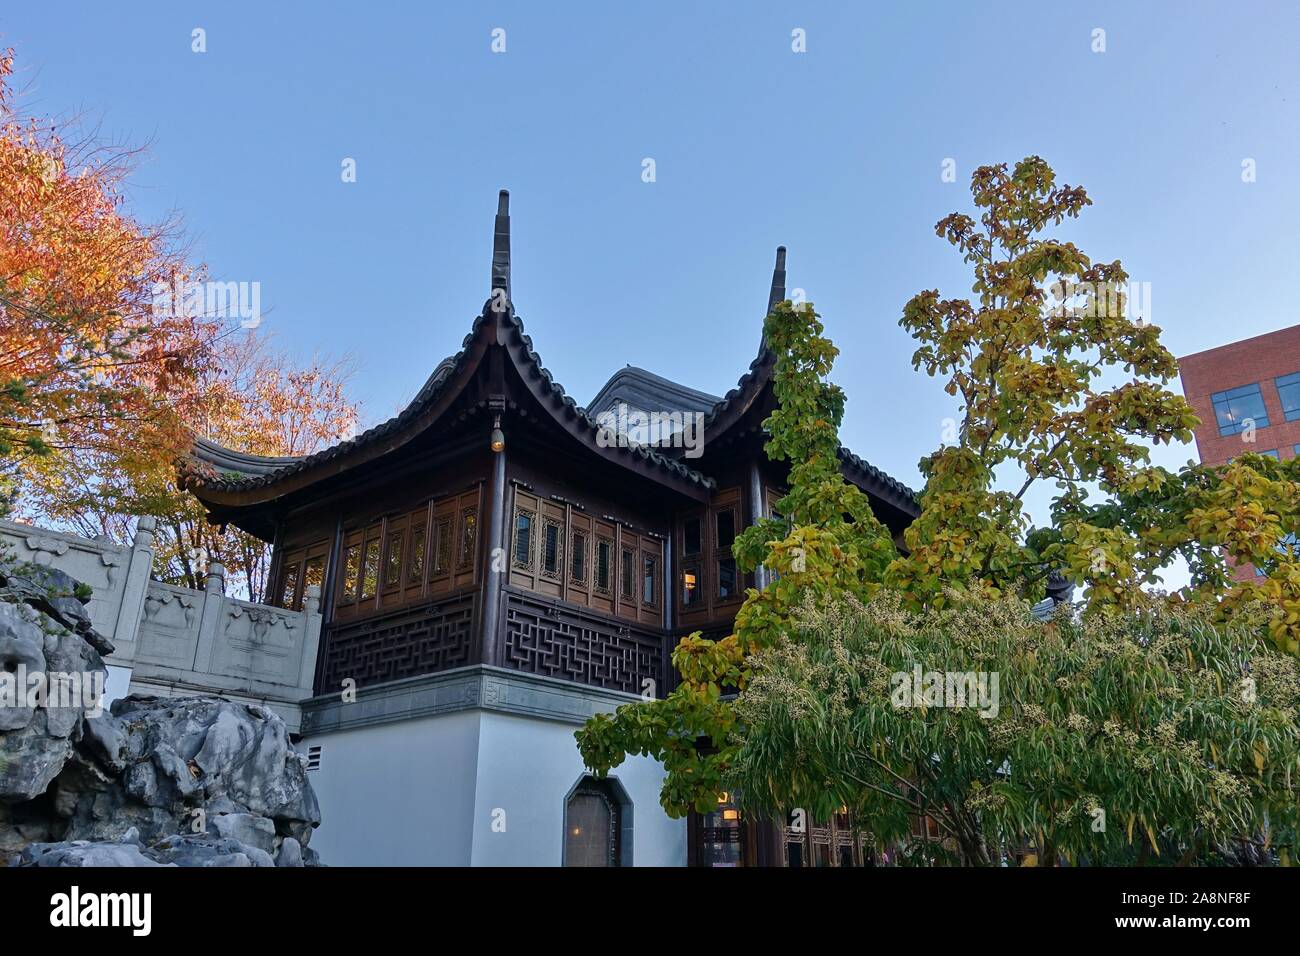 PORTLAND, OR -2 NOV 2019- View of the landmark Lan Su Chinese Garden (Portland Classical Chinese Garden, Garden of Awakening Orchids) located in the O Stock Photo